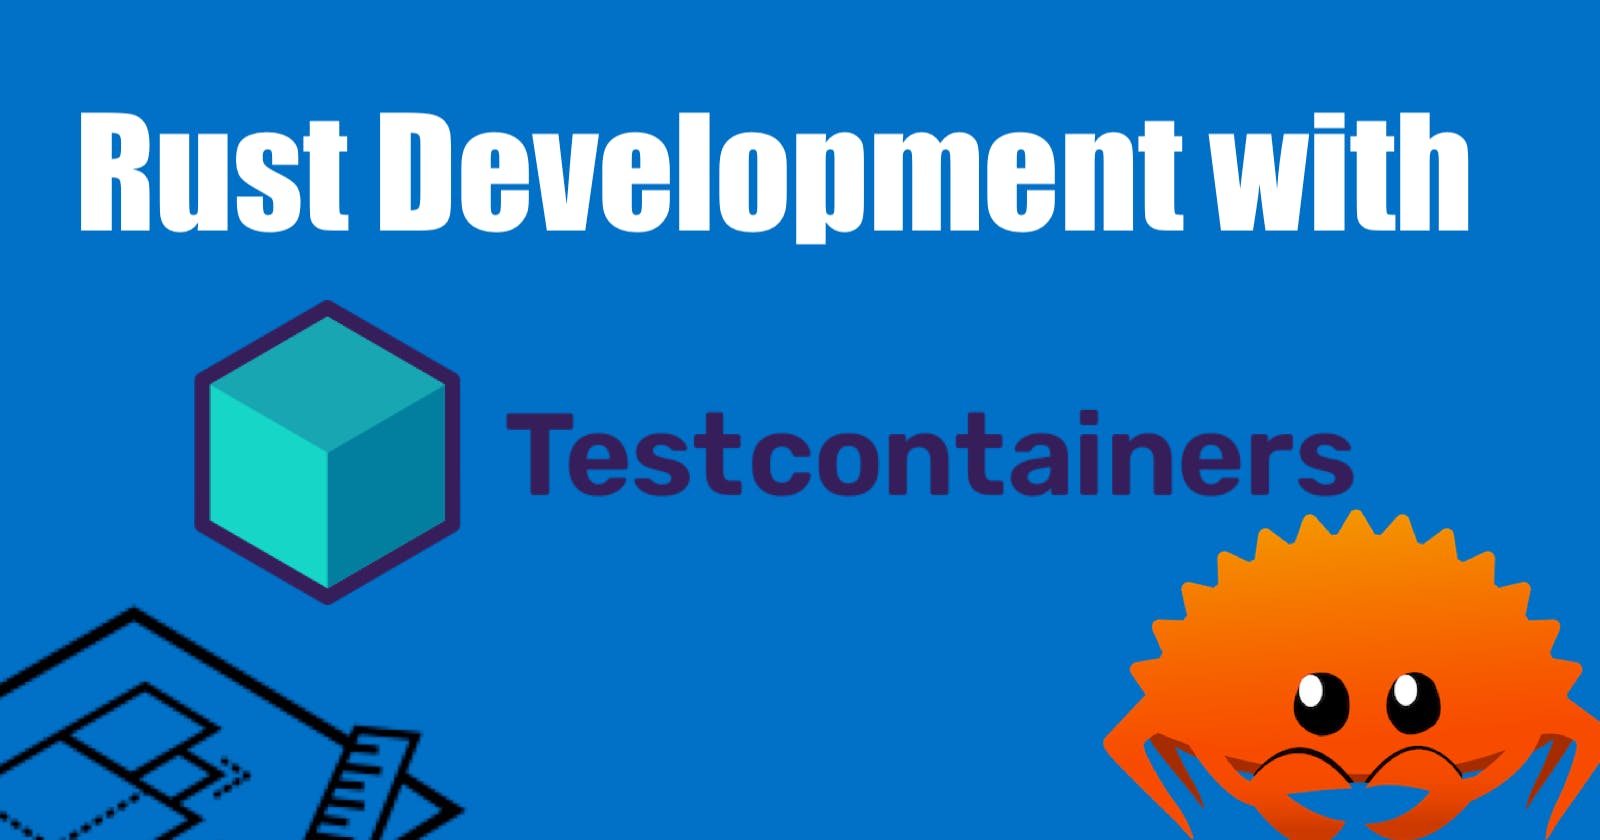 Rust Development with Testcontainers